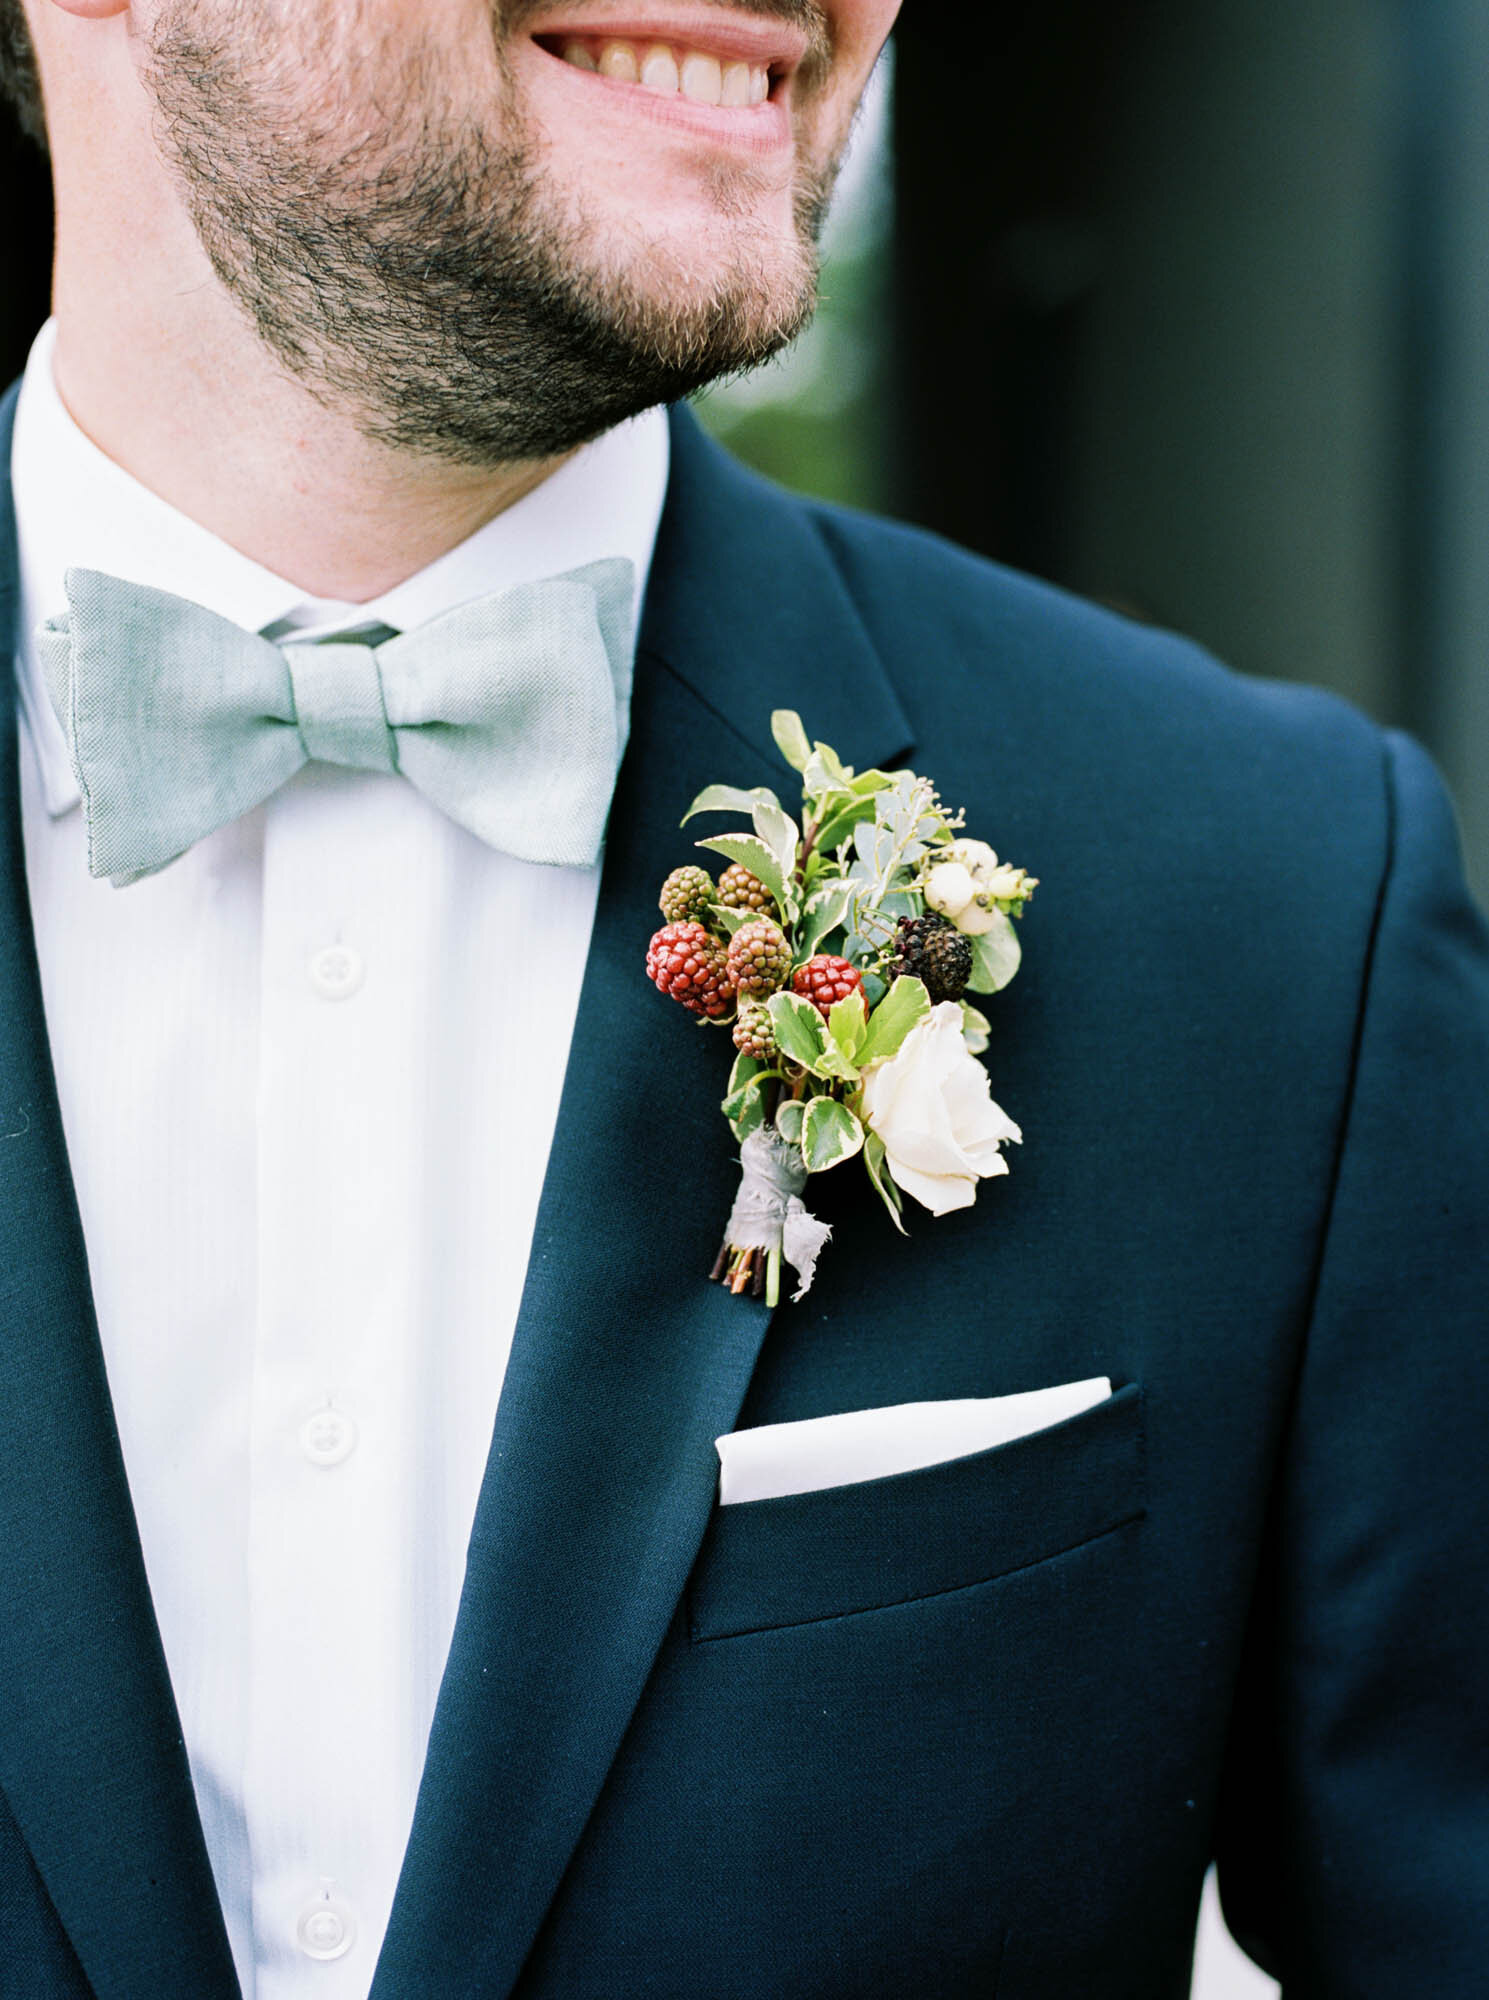  Blackberry &amp; floral boutonniere on groom with navy suit and light blue bowtie 